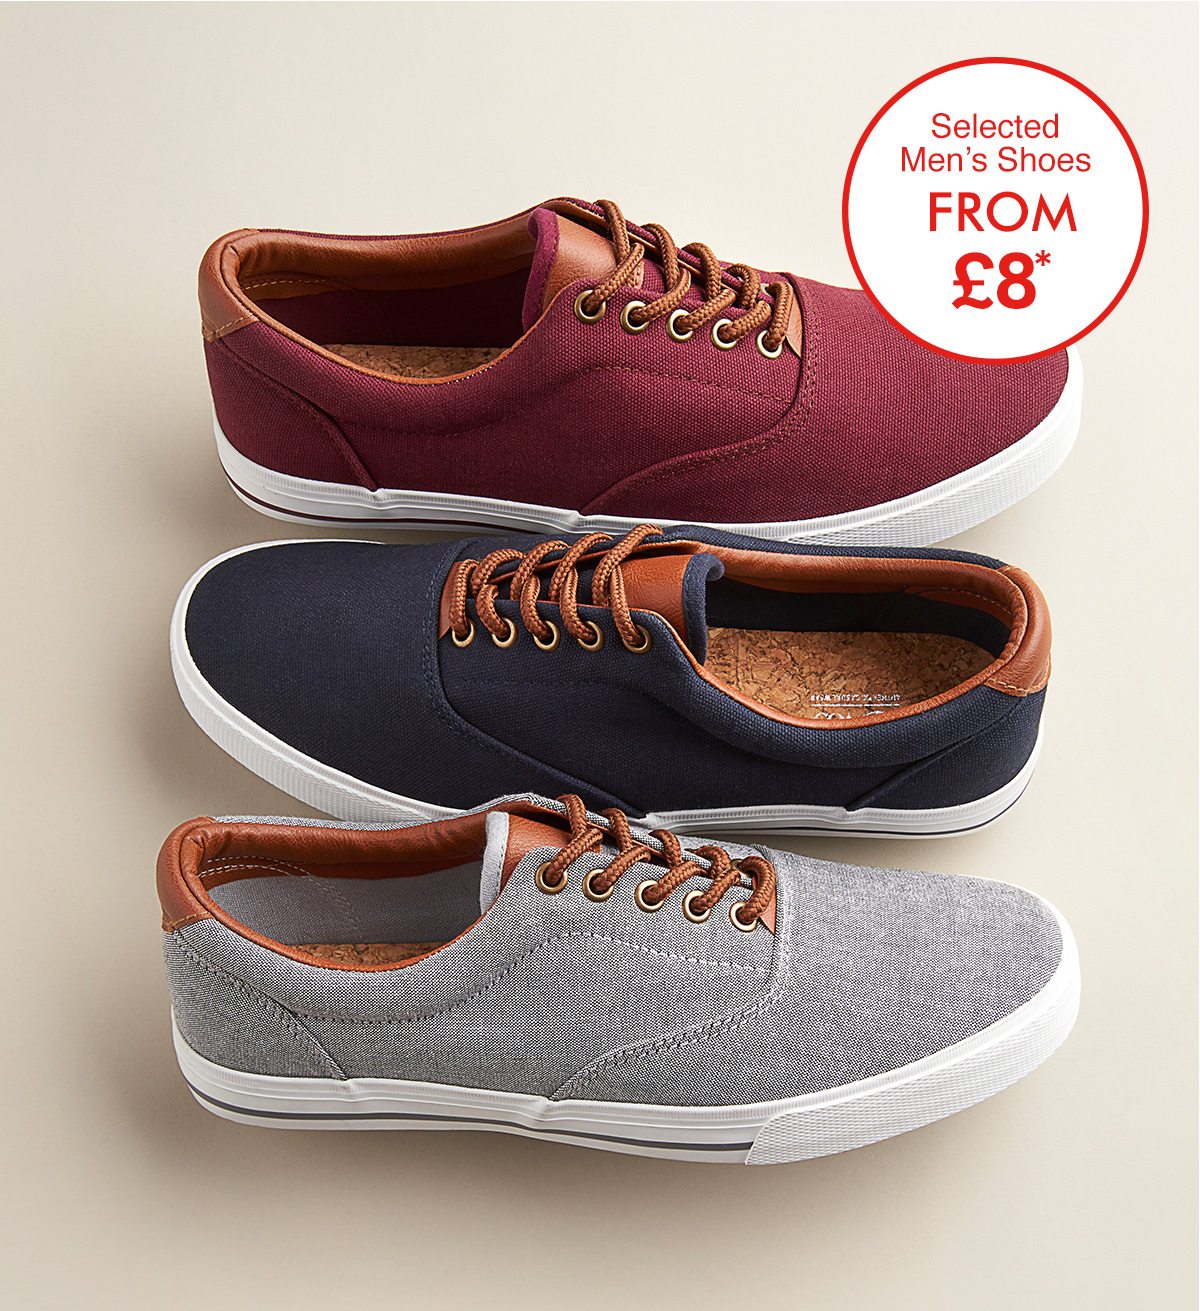 It's shoesday - Matalan Email Archive